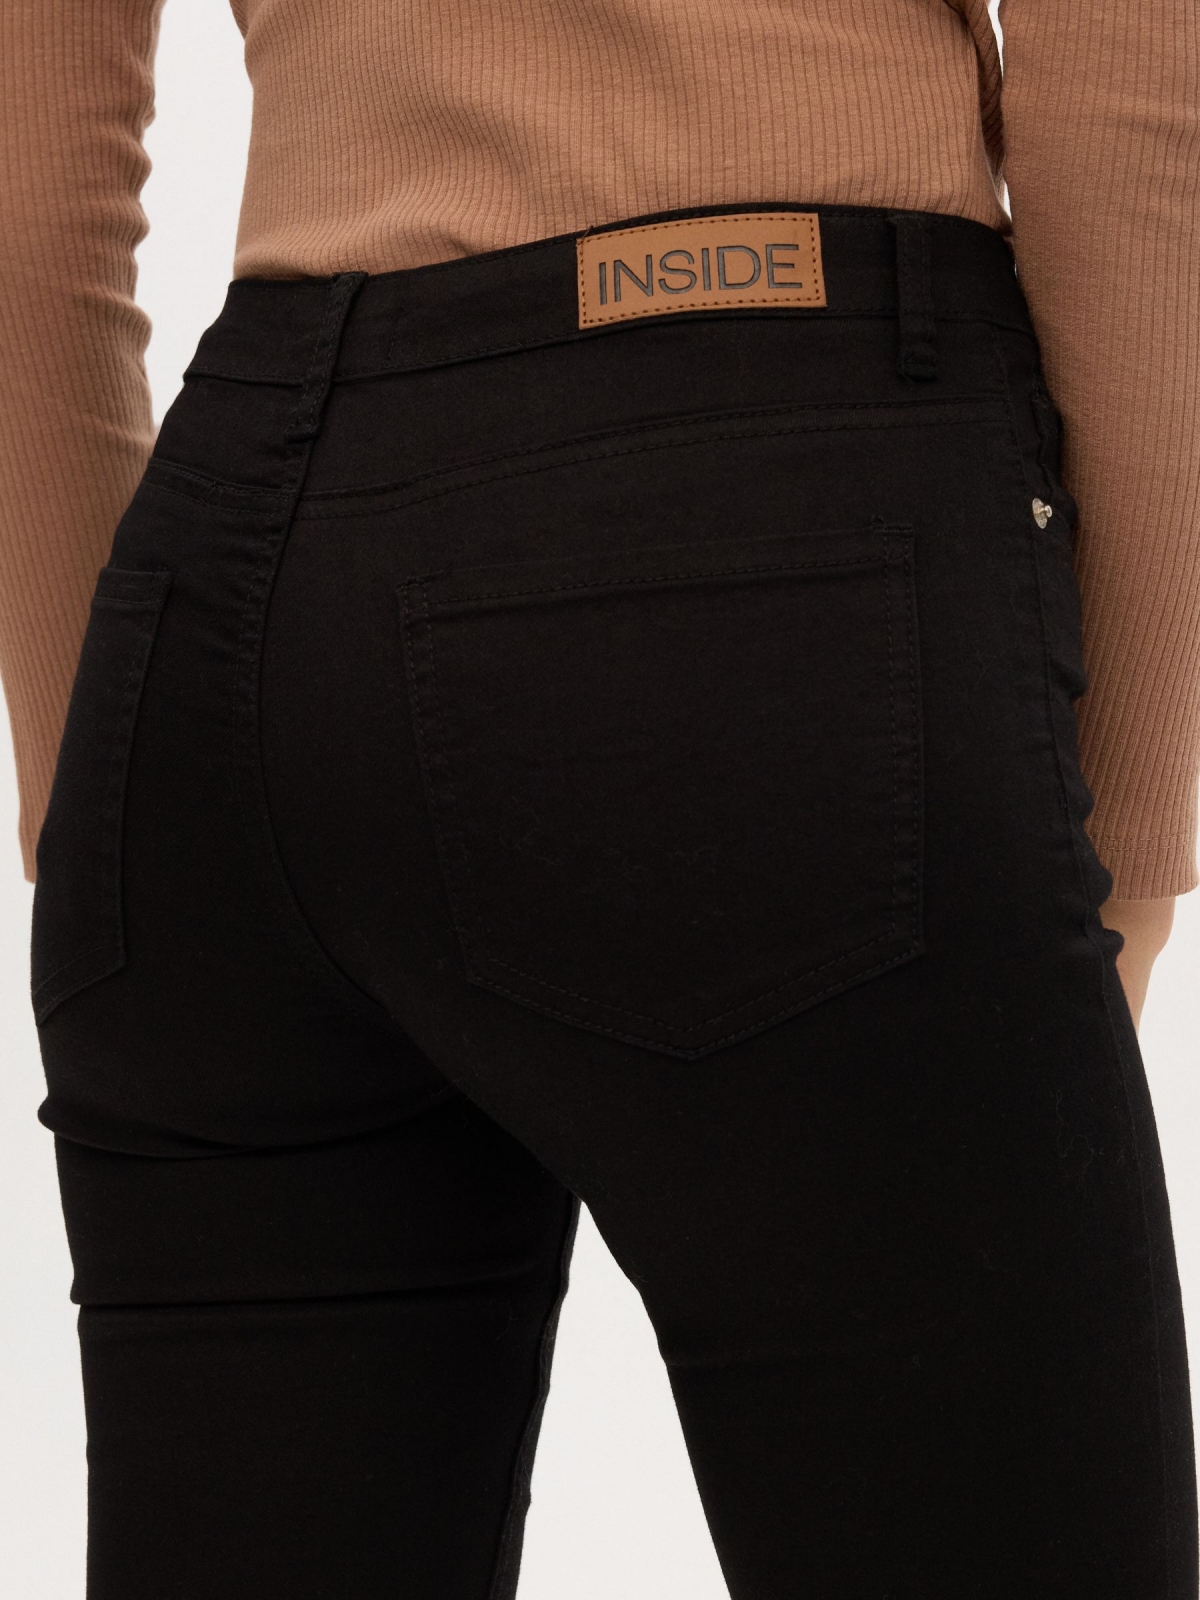 Mid rise skinny jeans black detail view